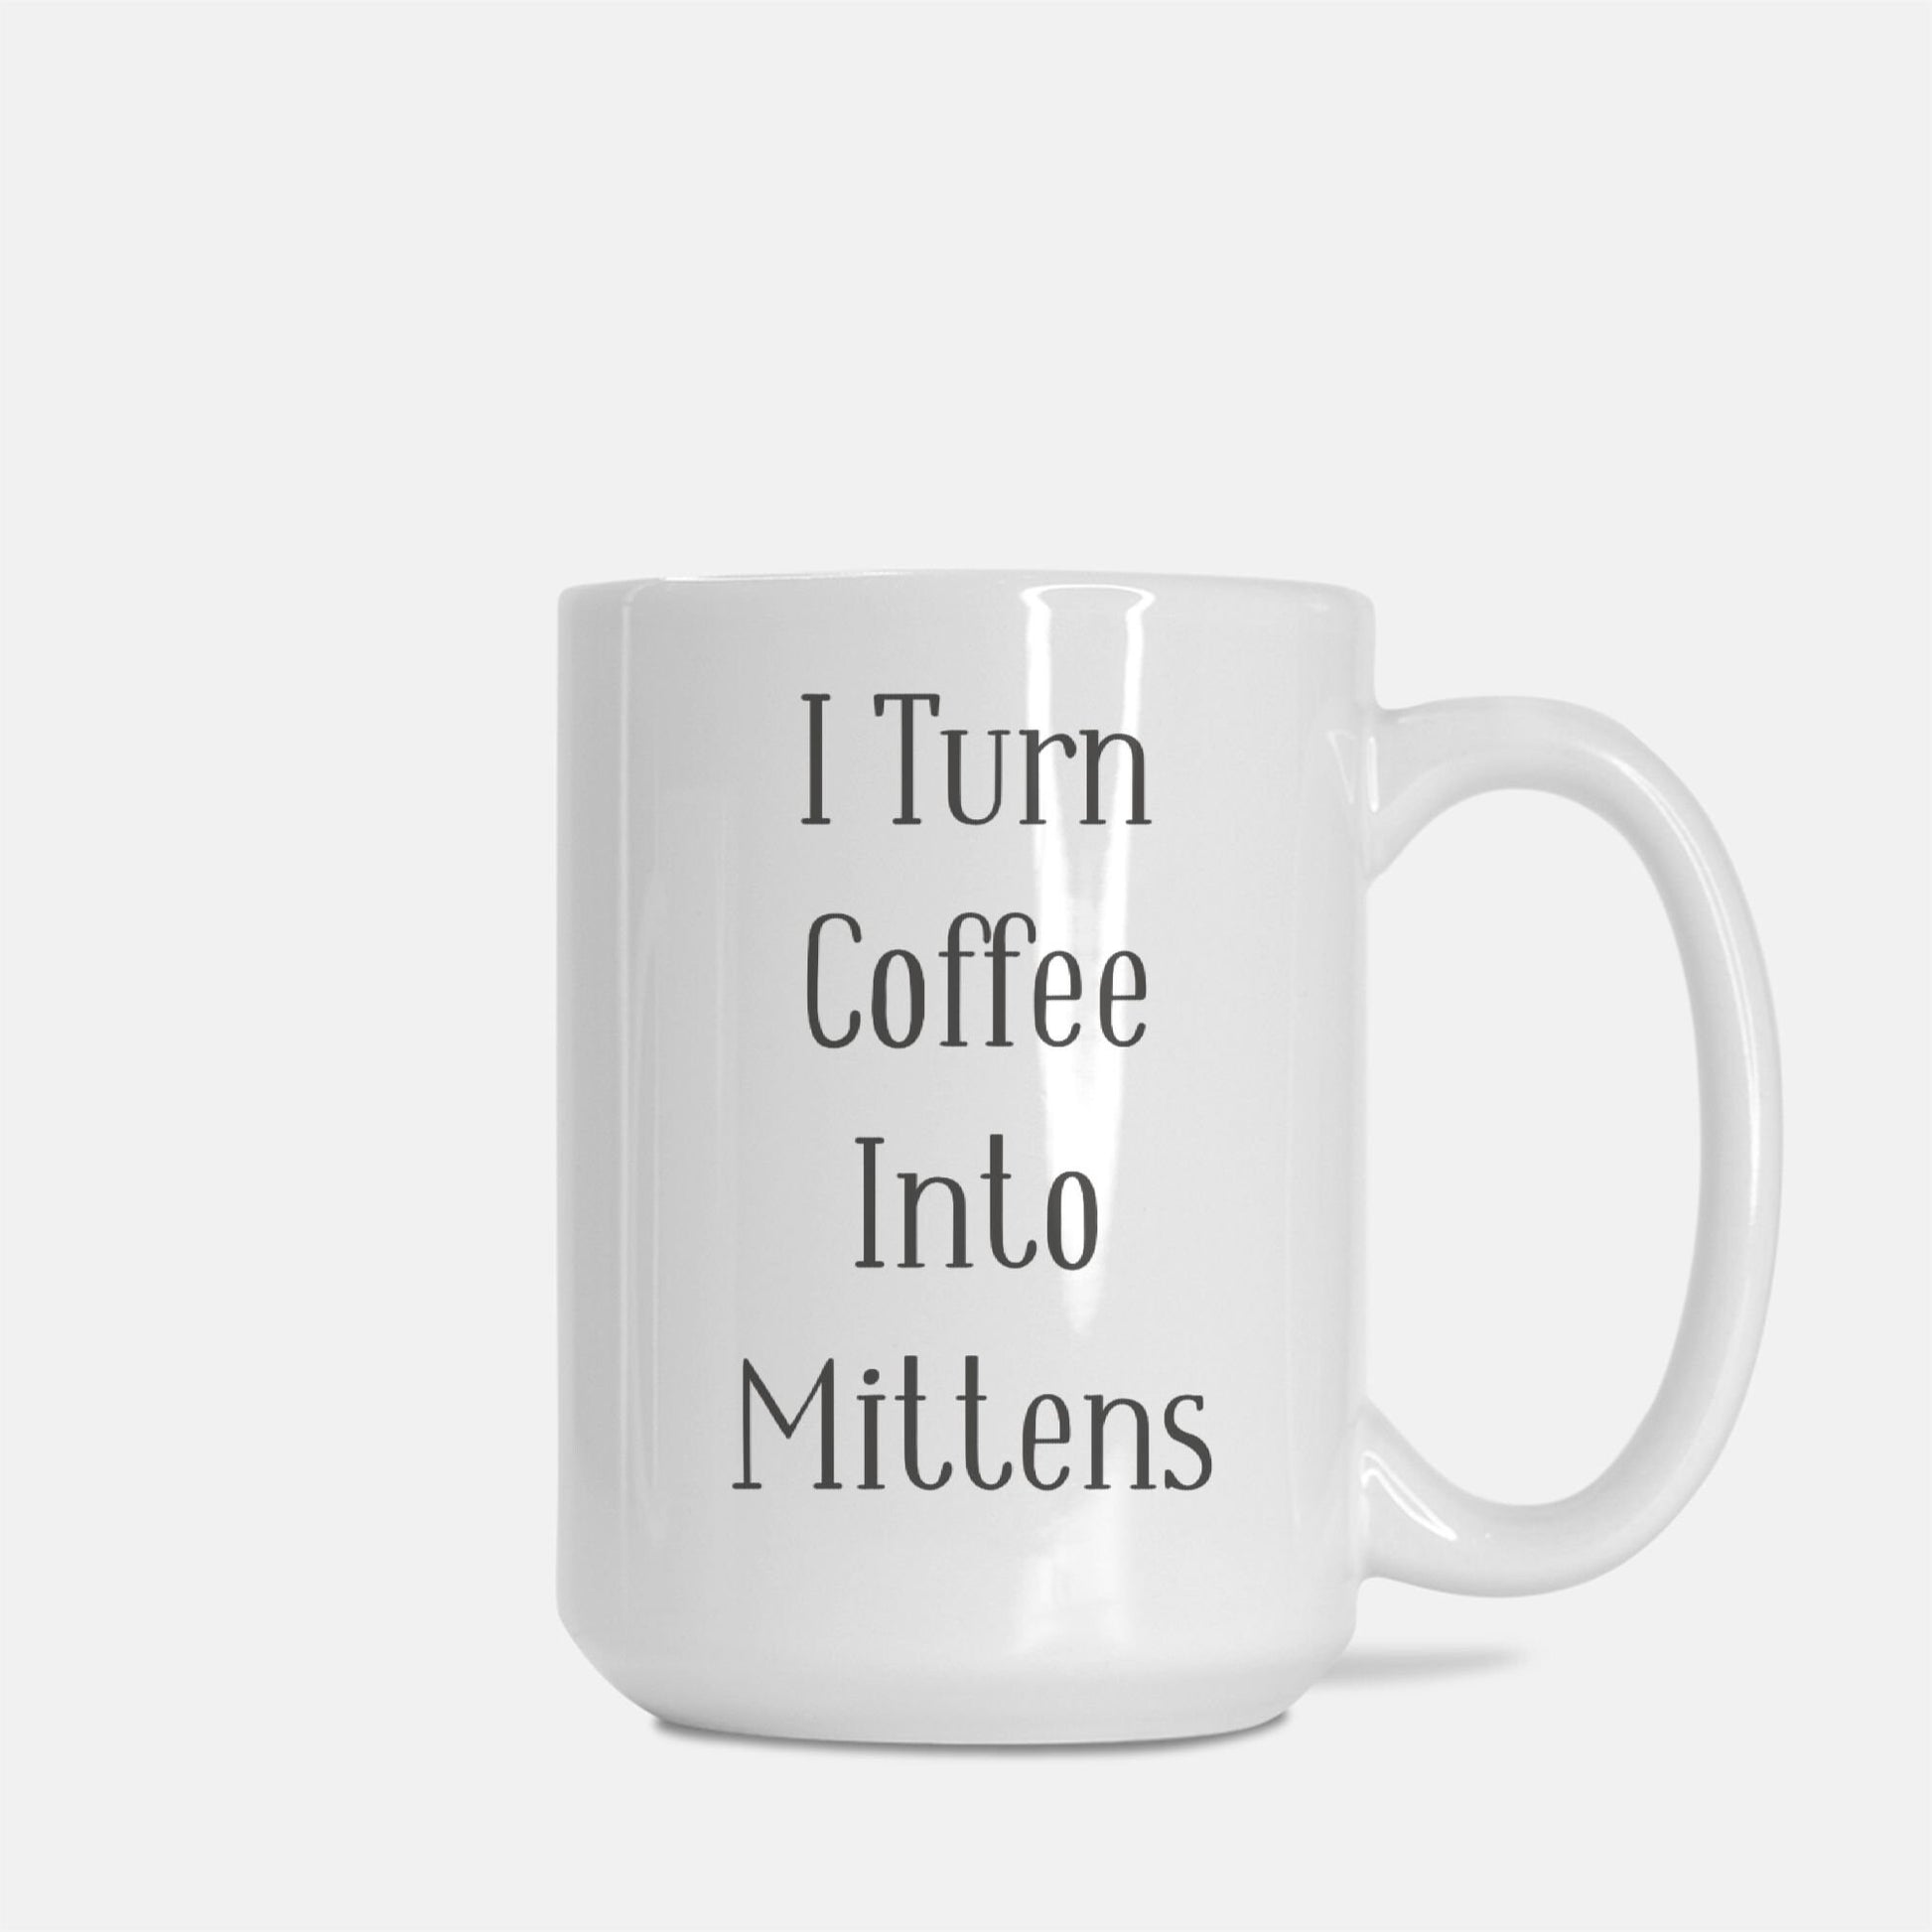 Funny Crafting Mug • I Turn Coffee Into Mittens • Gift Idea For Knitters